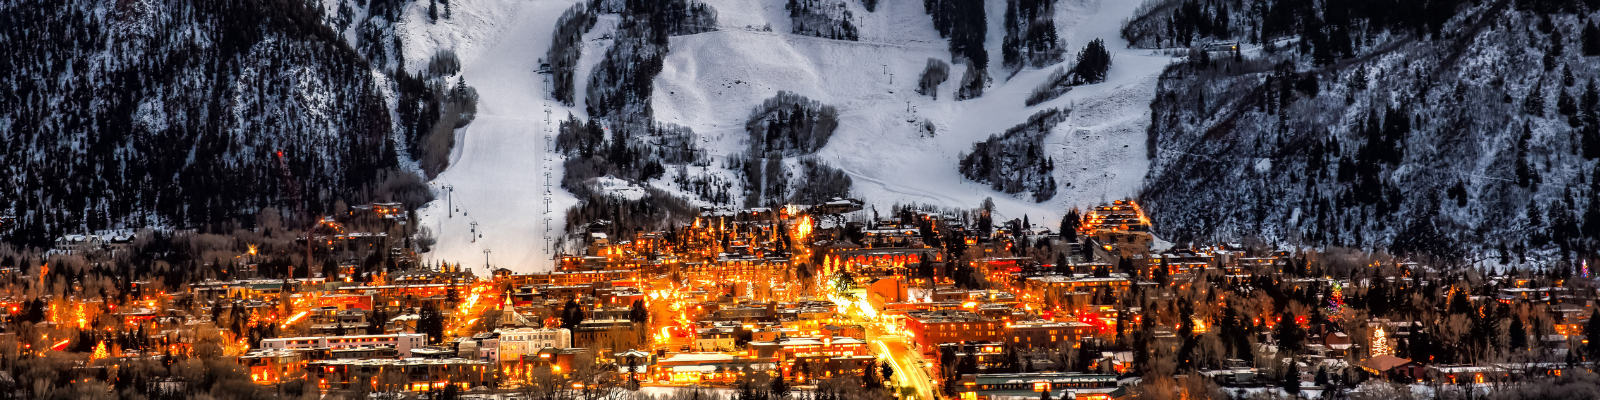 panoramic image of aspen in the evening with a row of lit up buildings in front of mountains